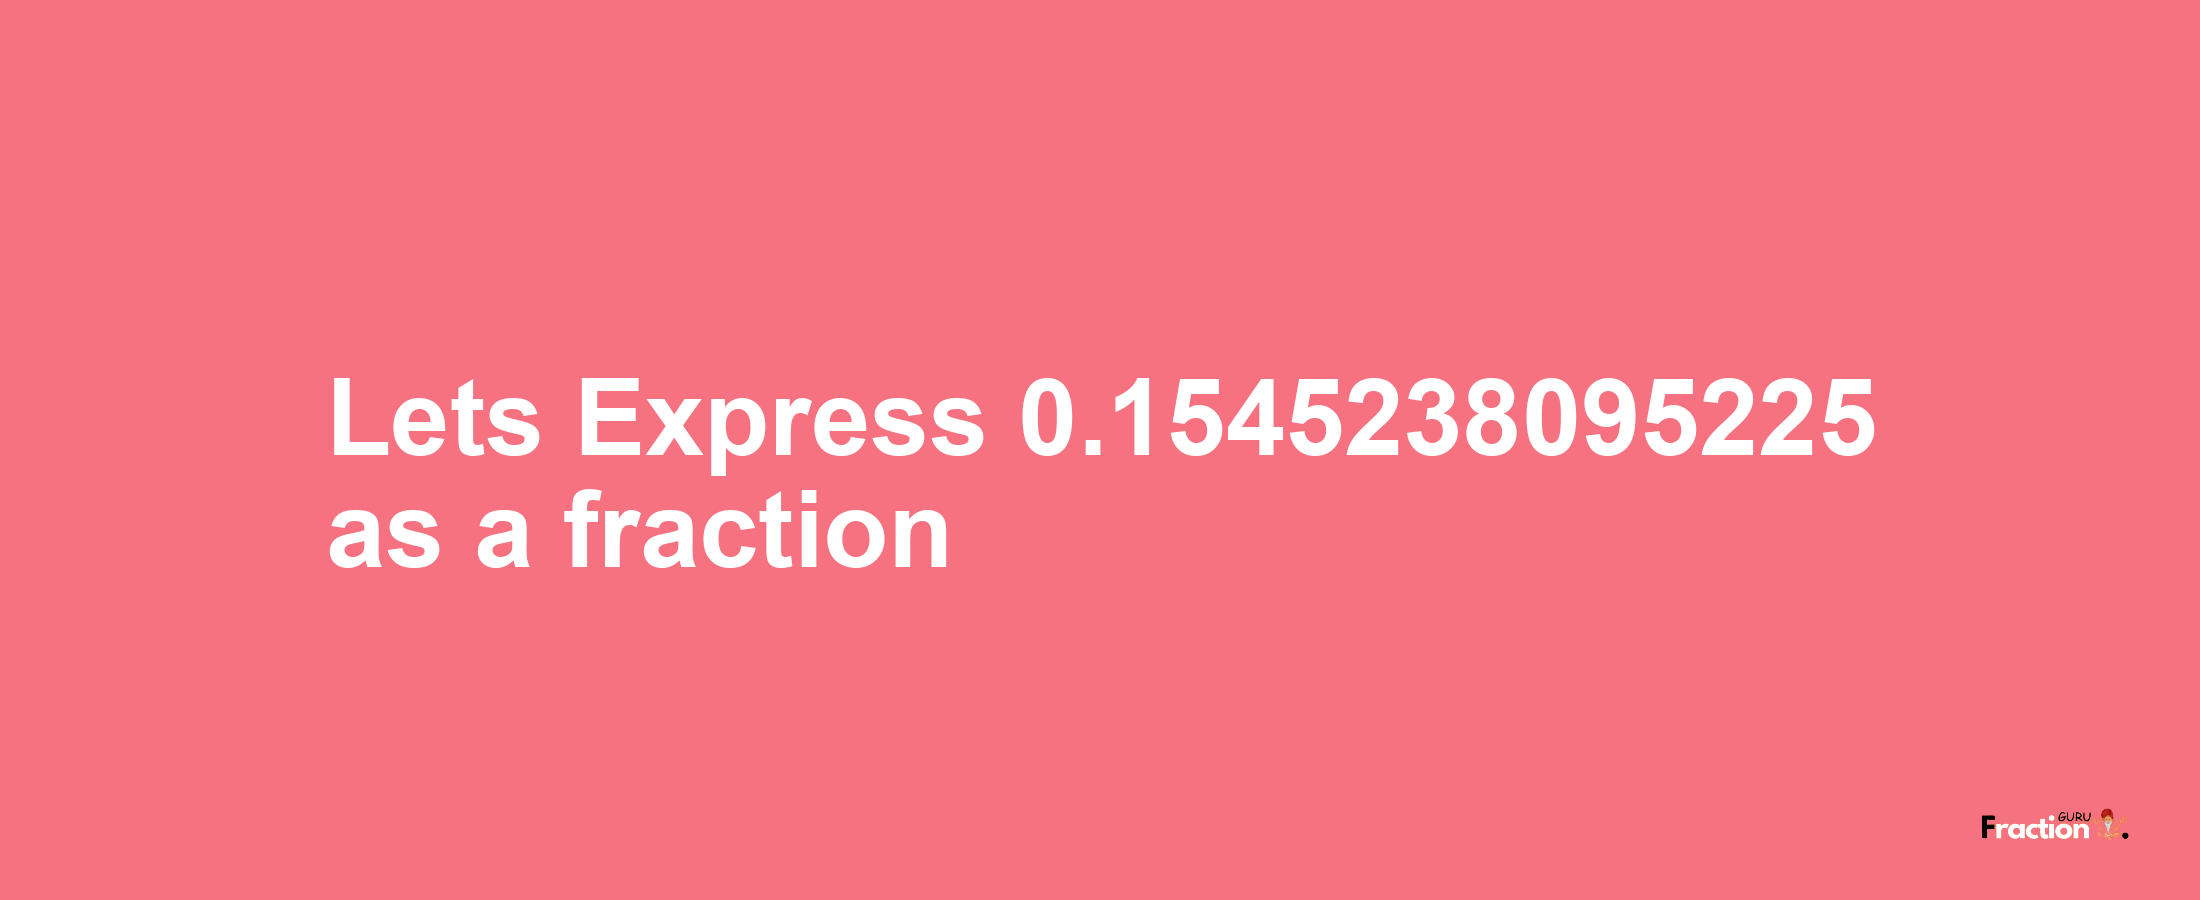 Lets Express 0.1545238095225 as afraction